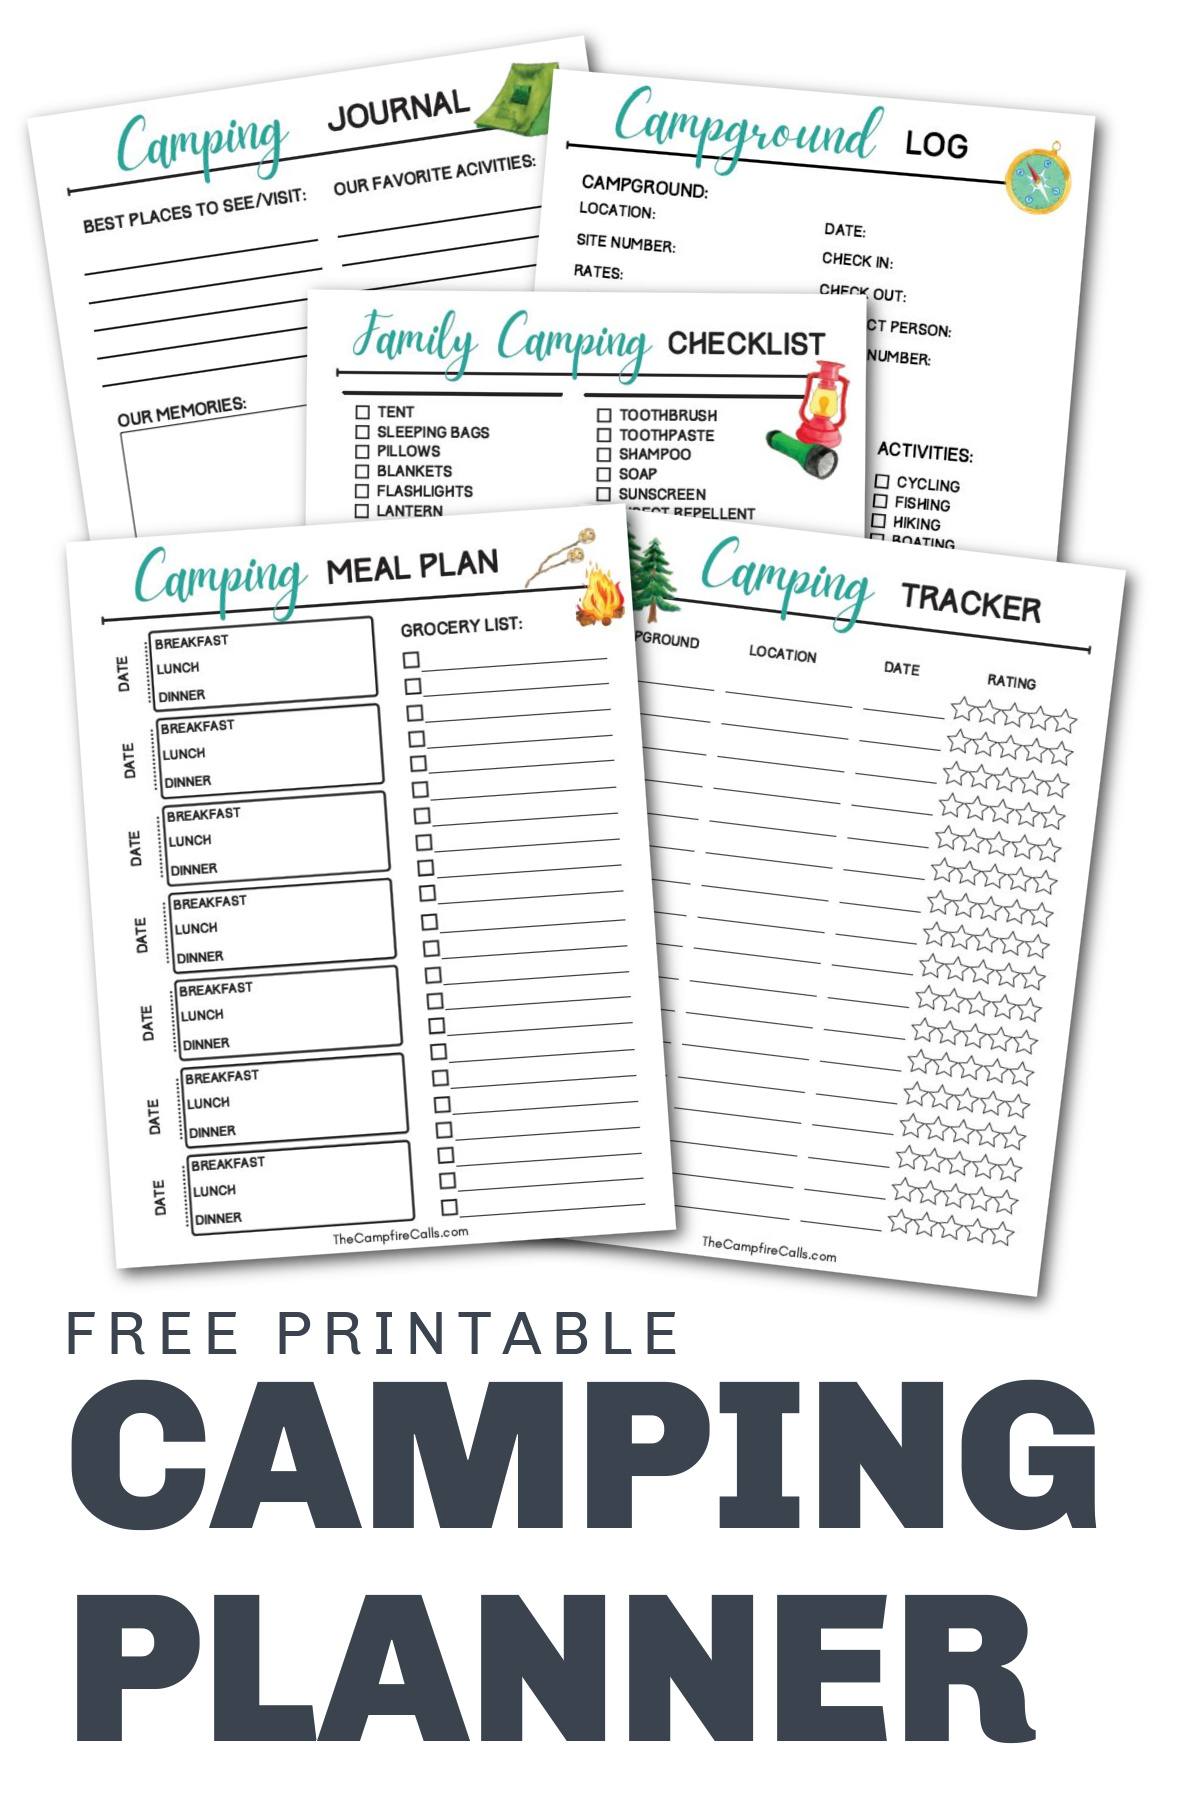 Use this Camping Planner Printable Bundle to plan family camping adventures and record all your camping memories for years to come.